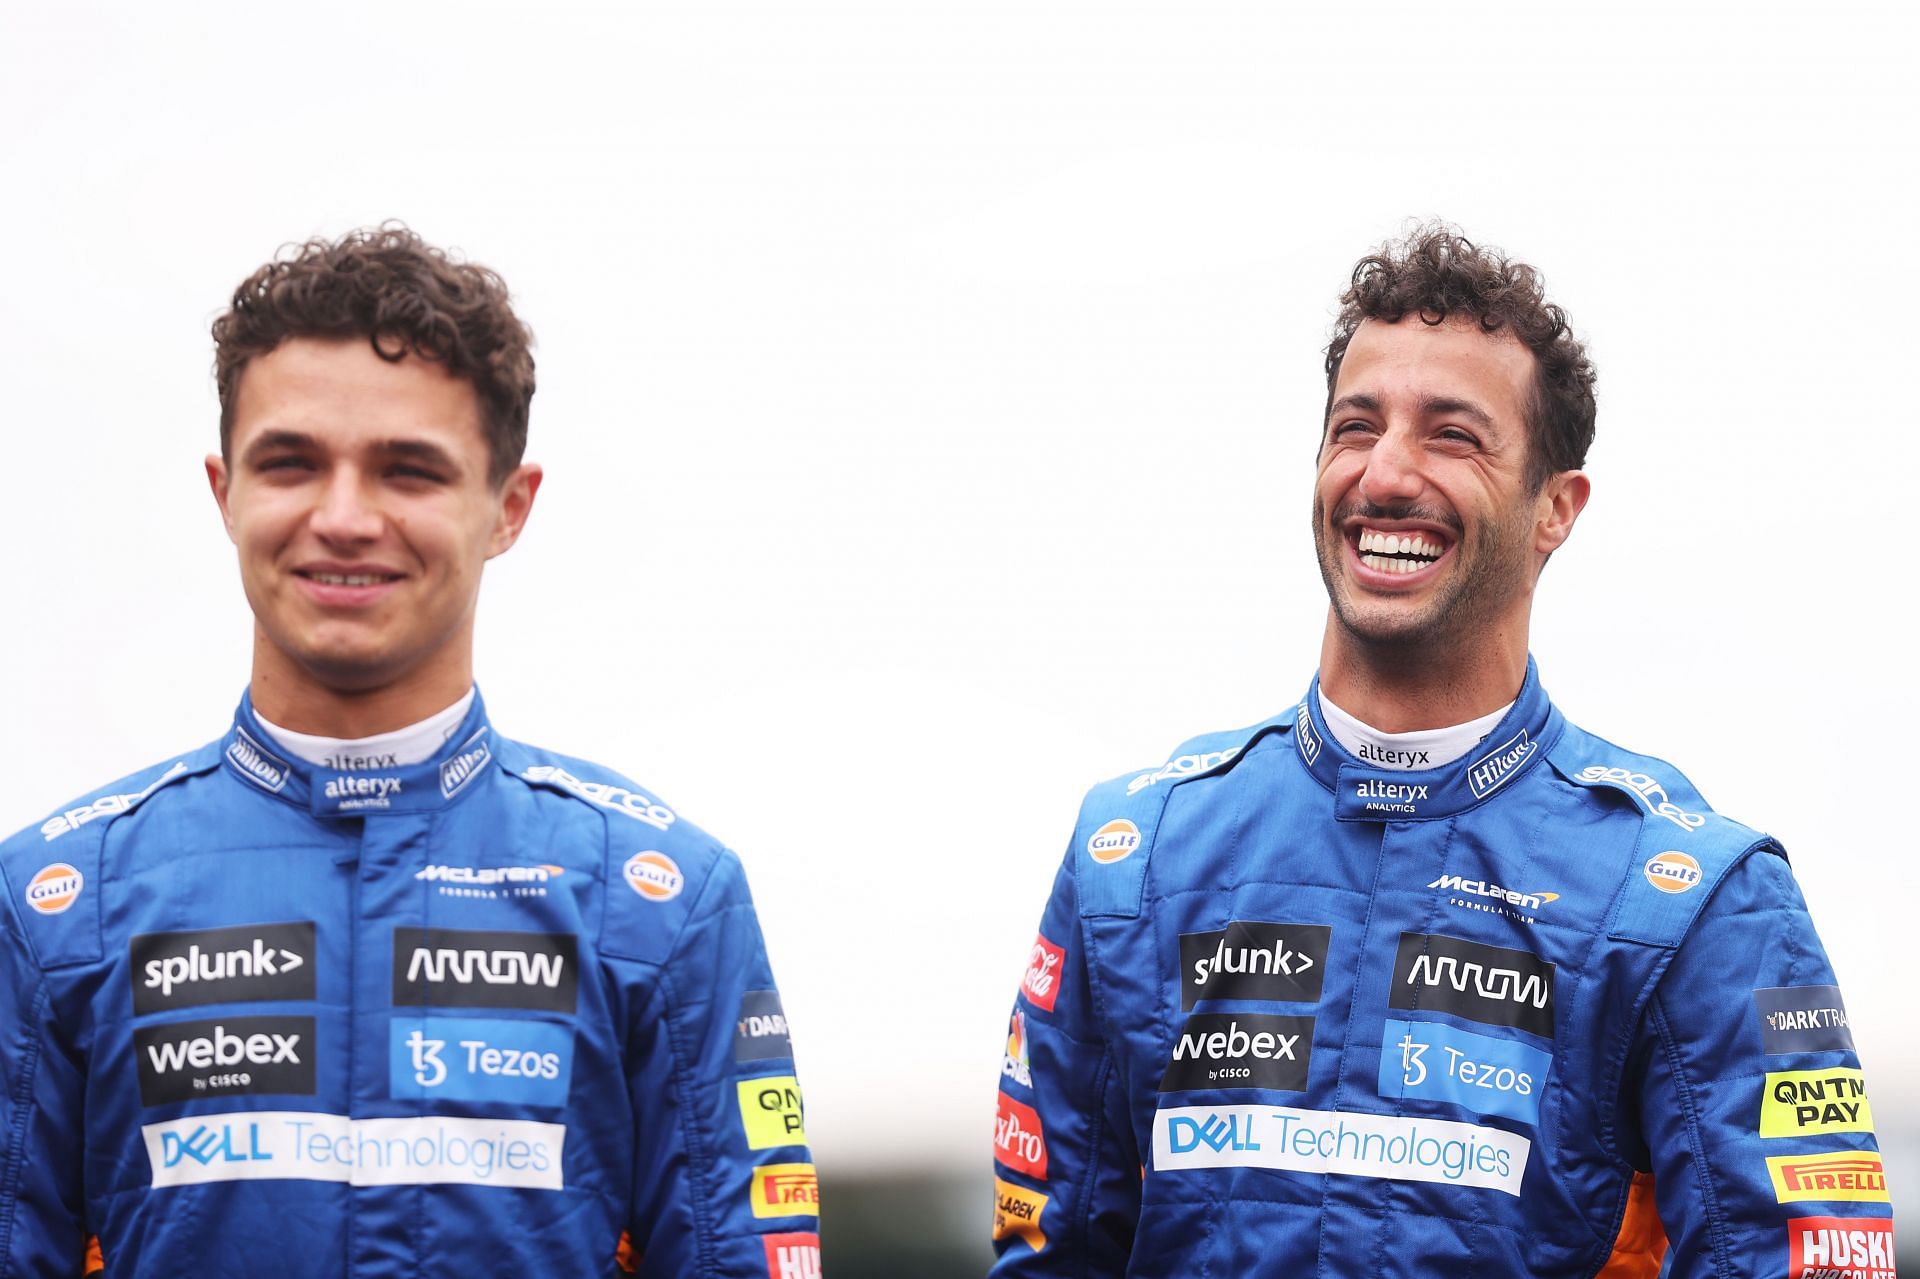 Lando Norris and Daniel Ricciardo during the unveiling of the prototype car for 2022 at the Great Britain Grand Prix (Photo by Lars Baron/Getty Images)